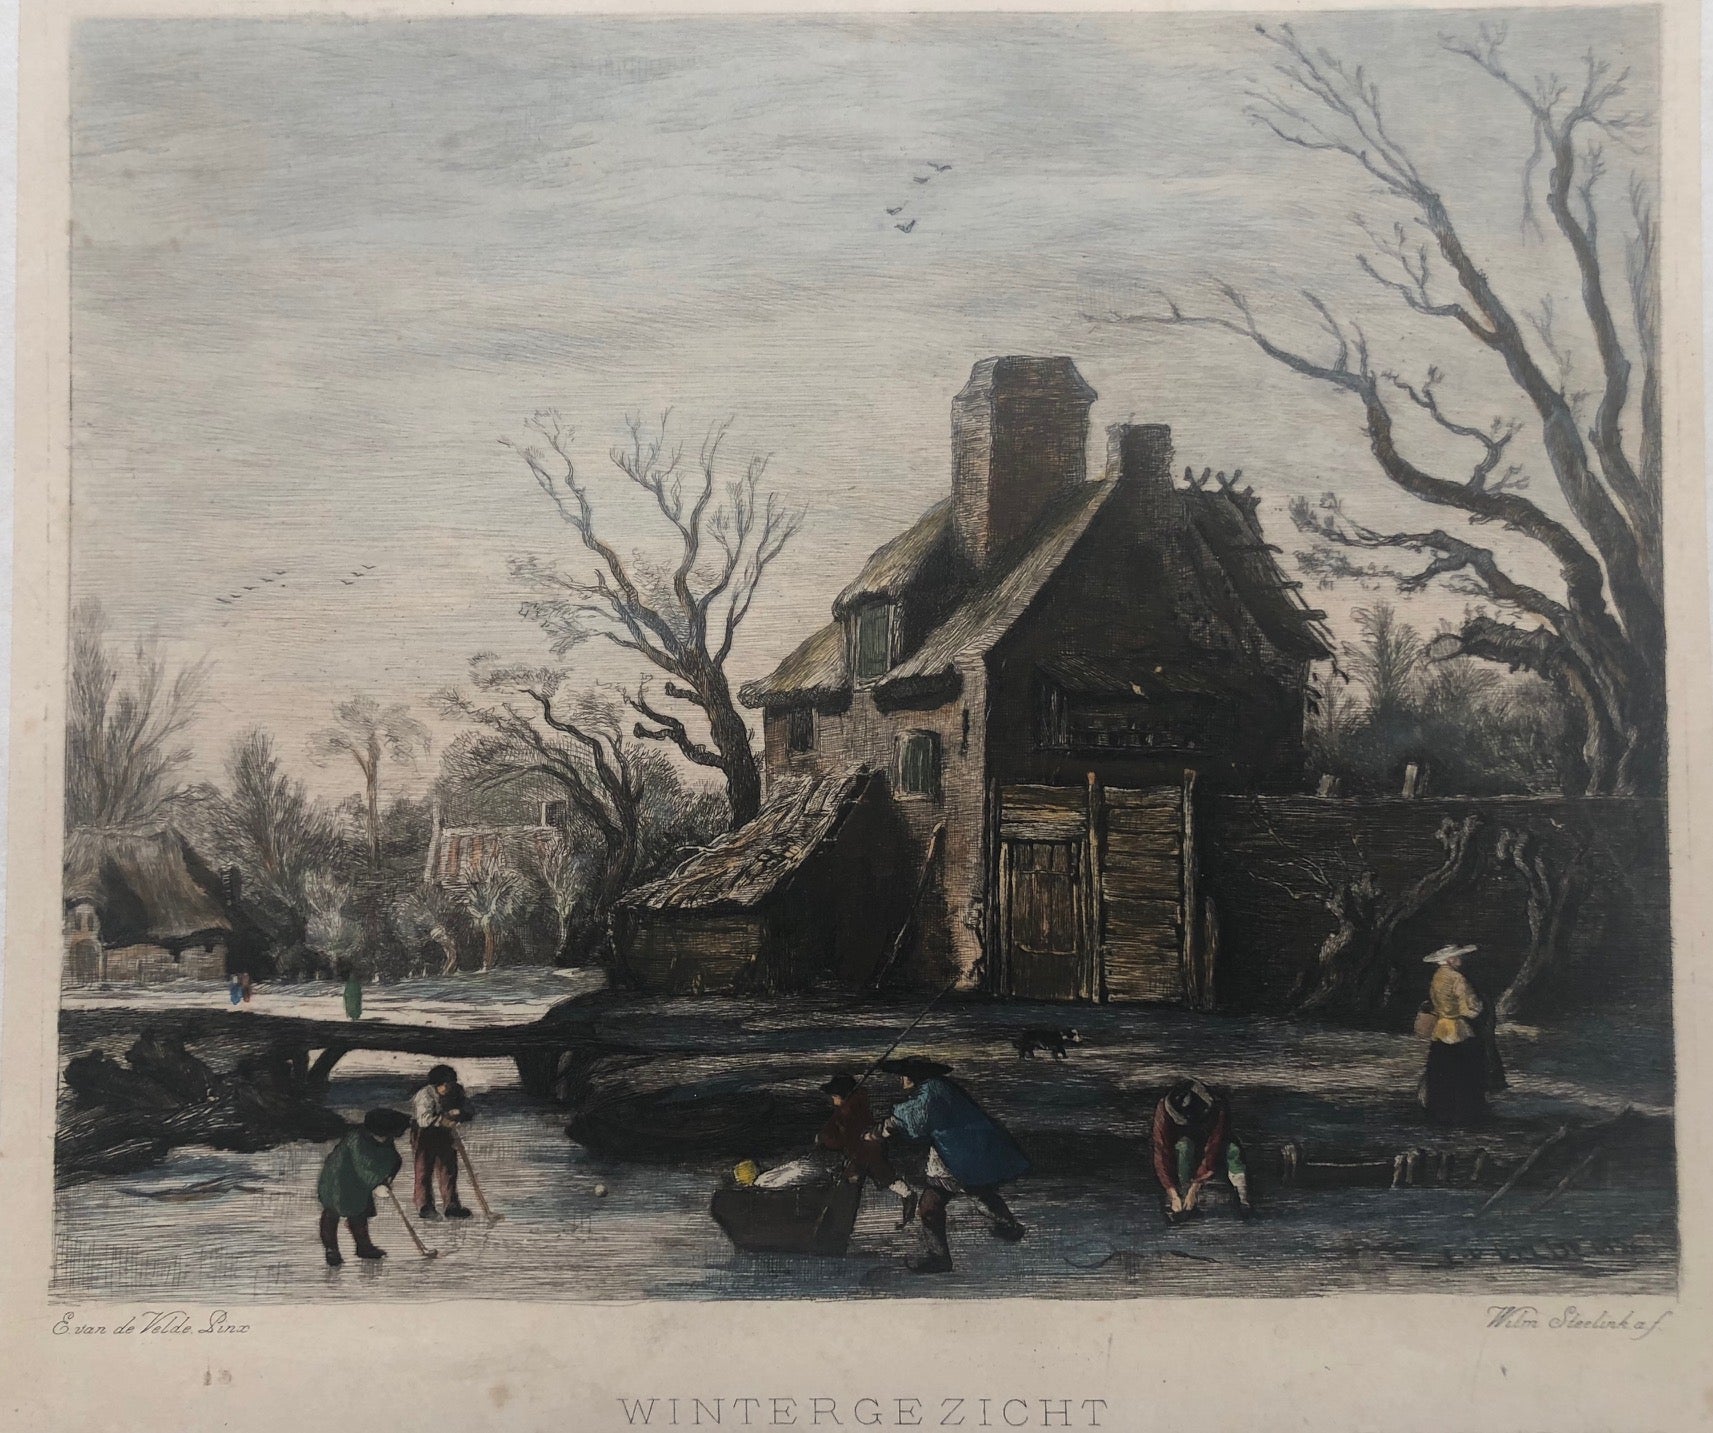  'Wintergezicht'  . Nice winterscene showing a Dutch village with people skating and playing 'Kolf' on the ice.